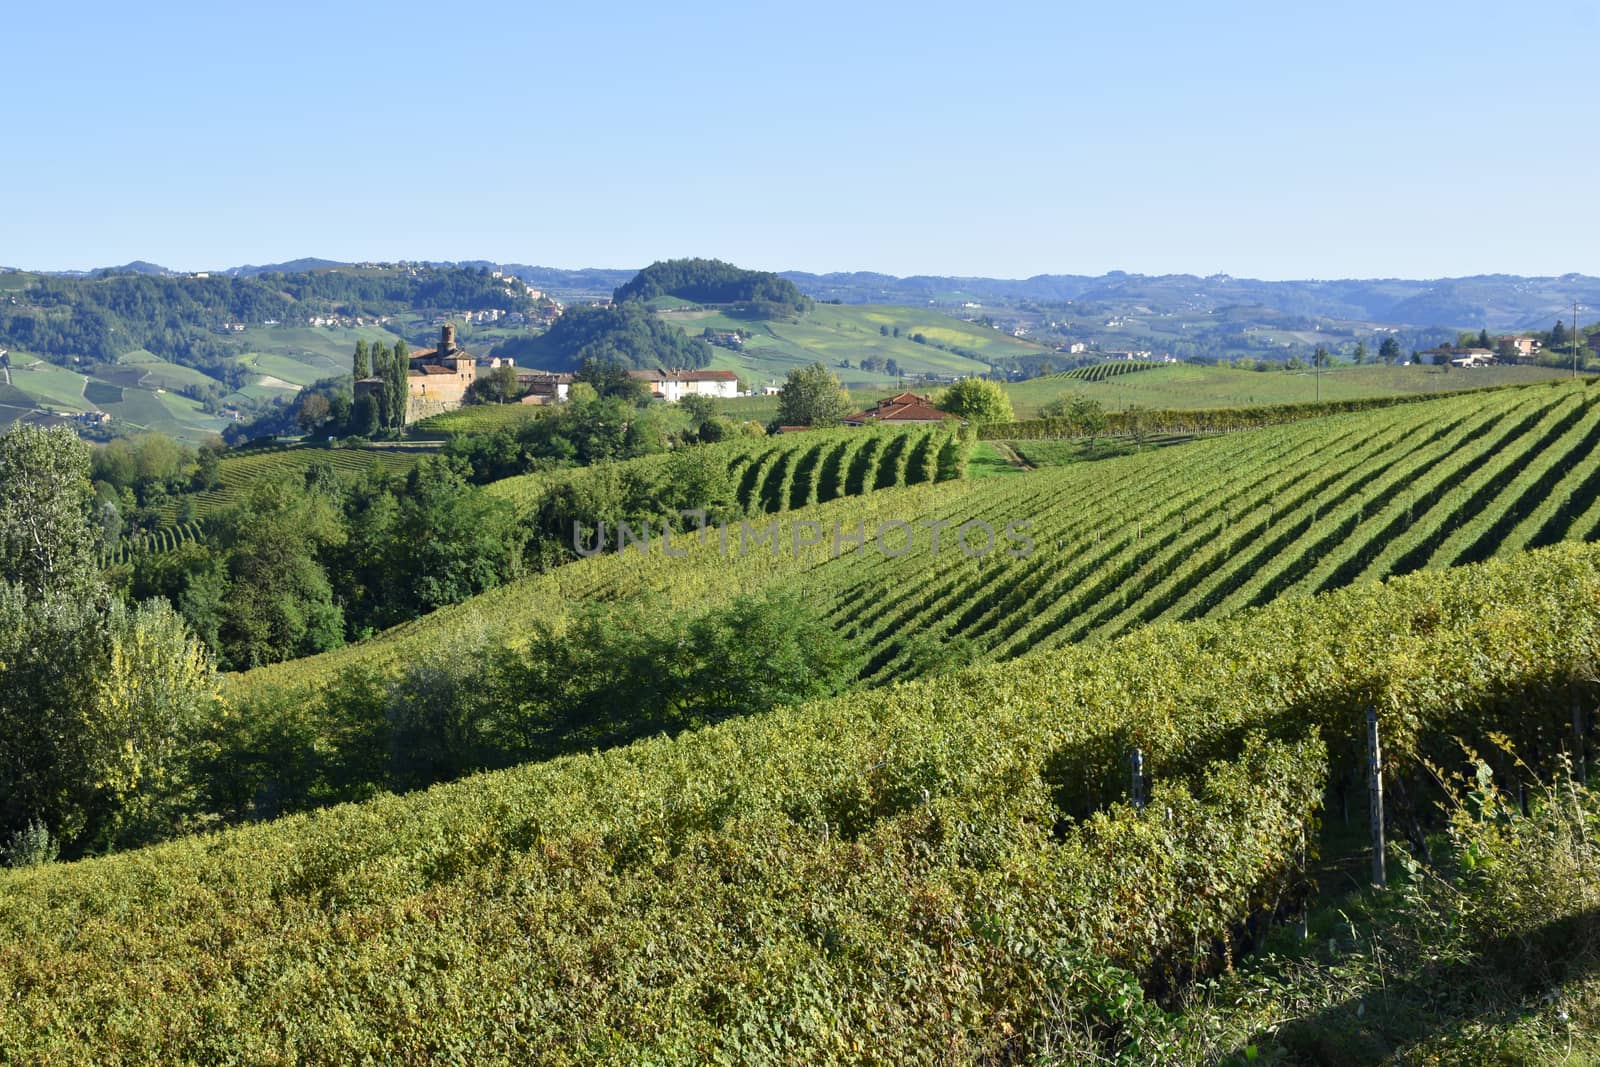 Langhe vineyards panorama; Langhe are famous for Italian wine production, in Piedmont.